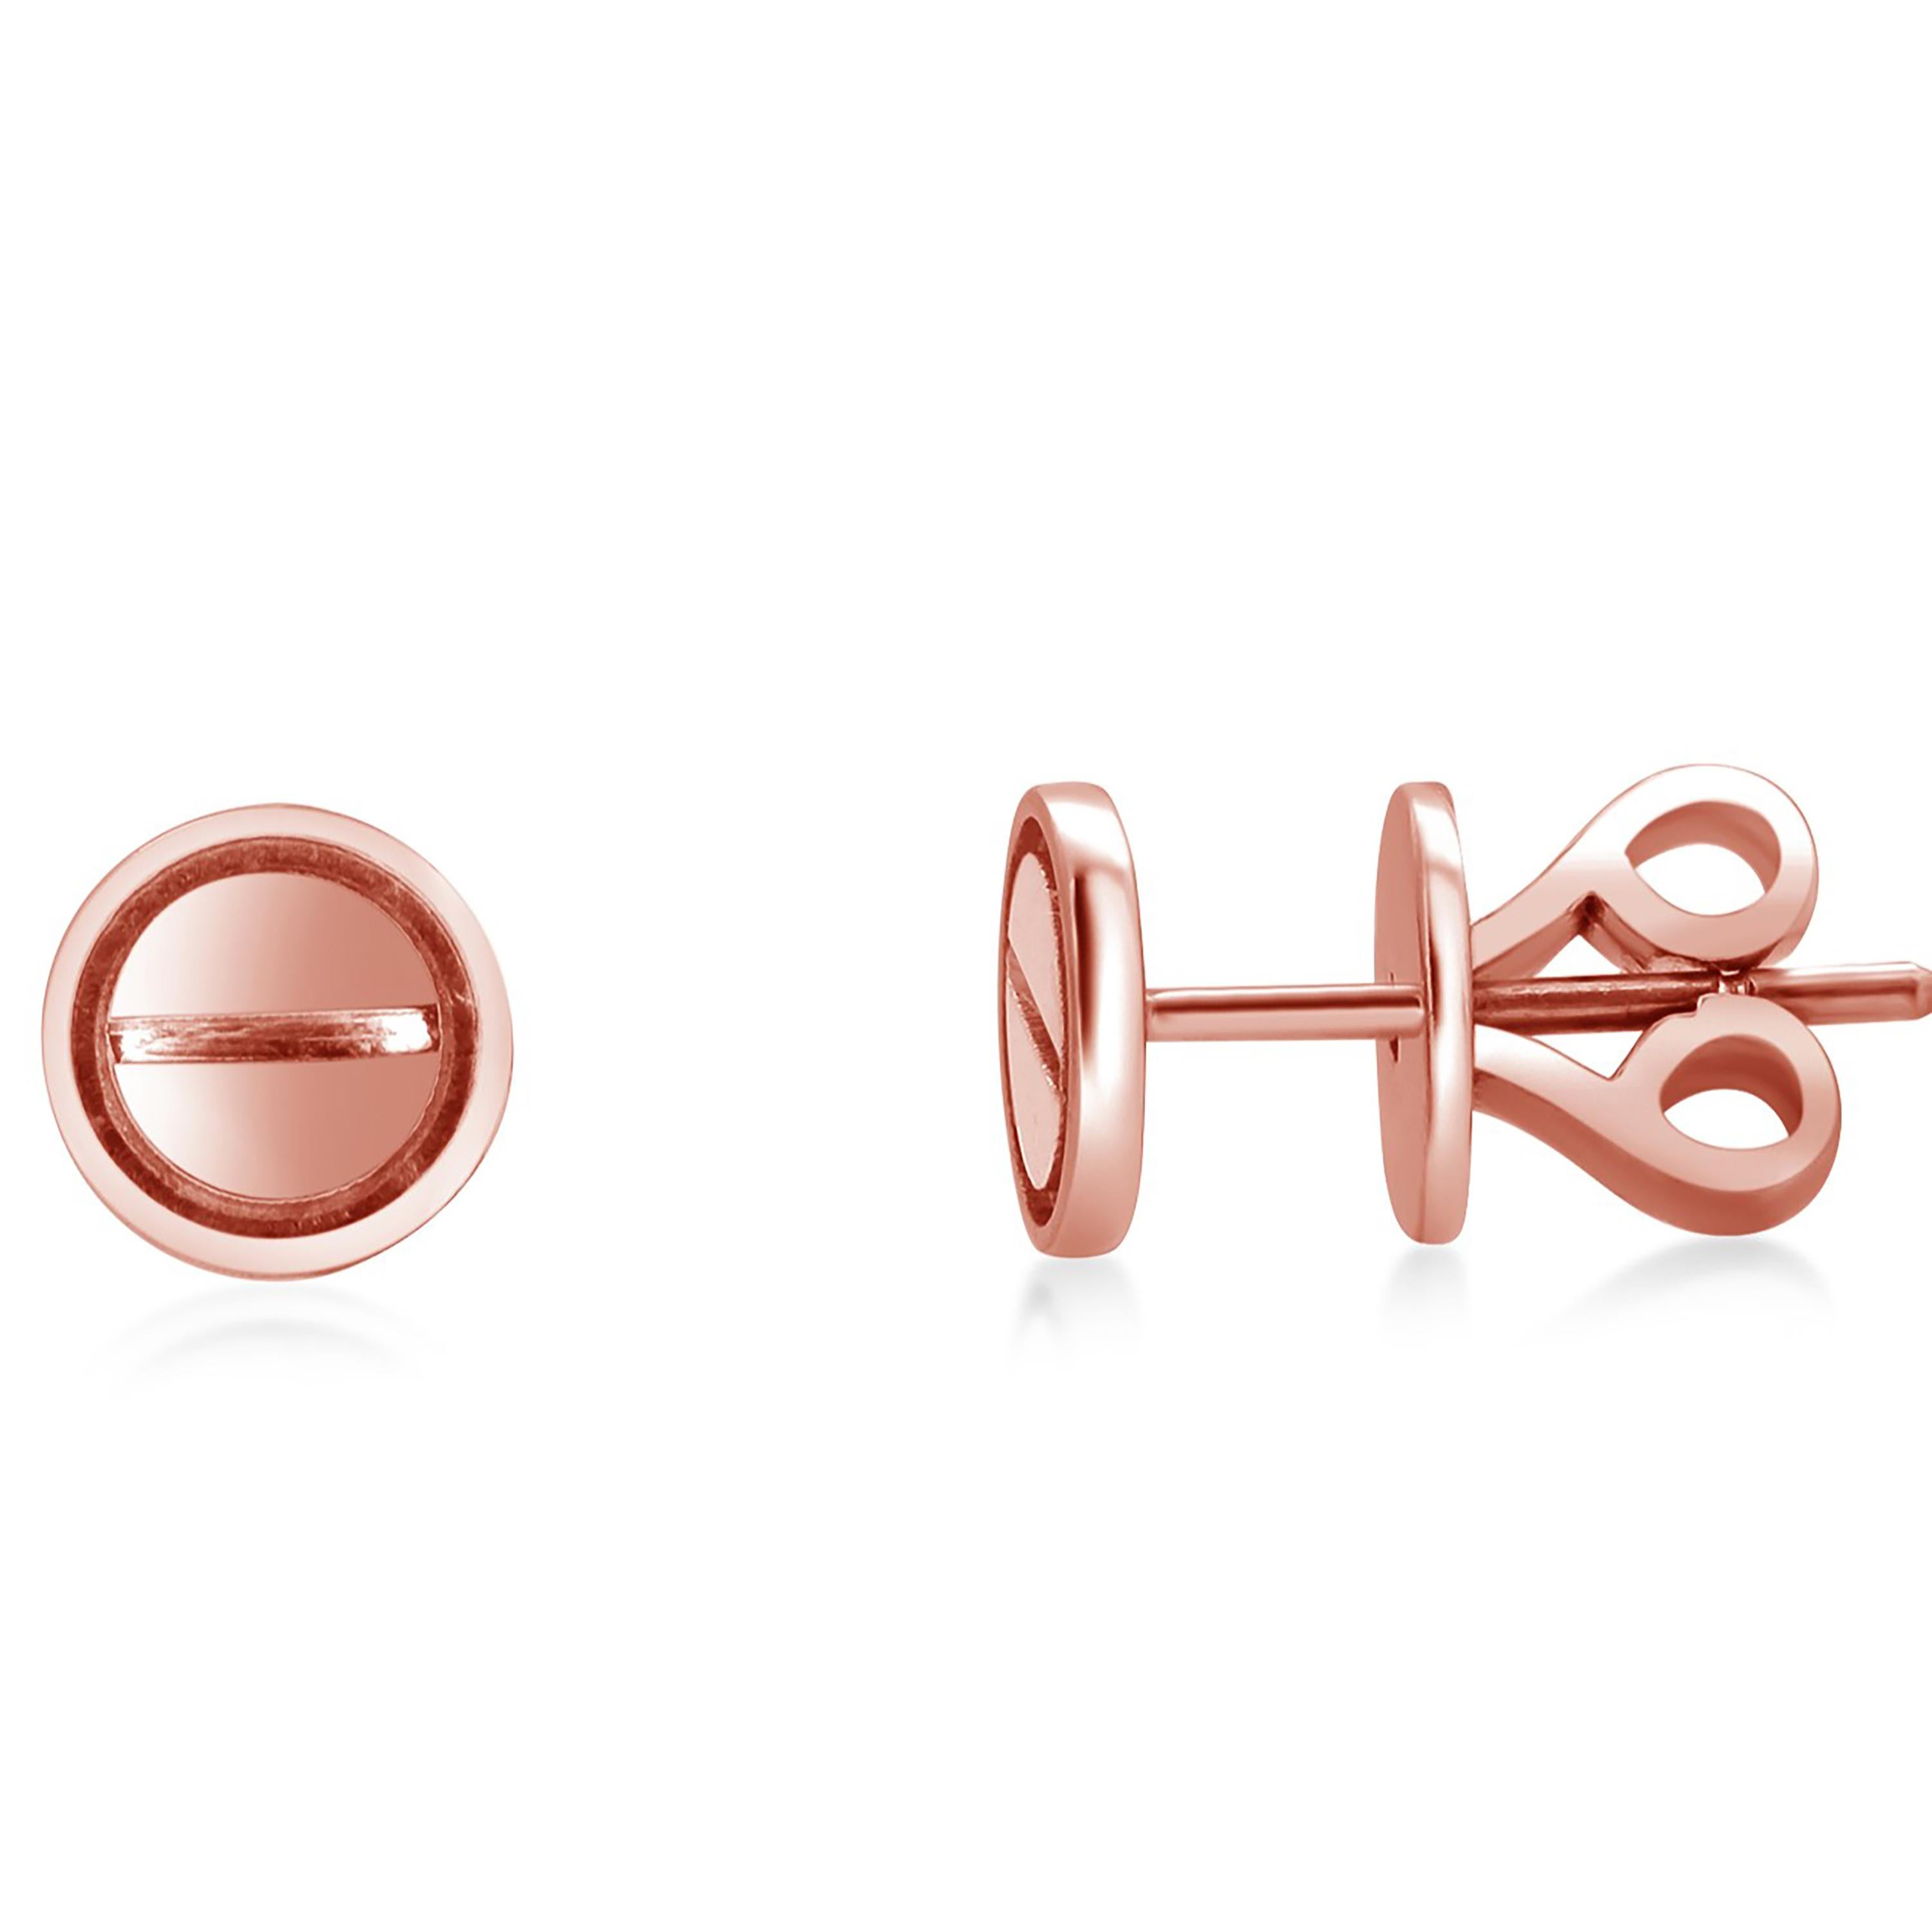 Contemporary Vintage Rose Gold 0.21 Inch Stud Earrings in the Style of Cartier